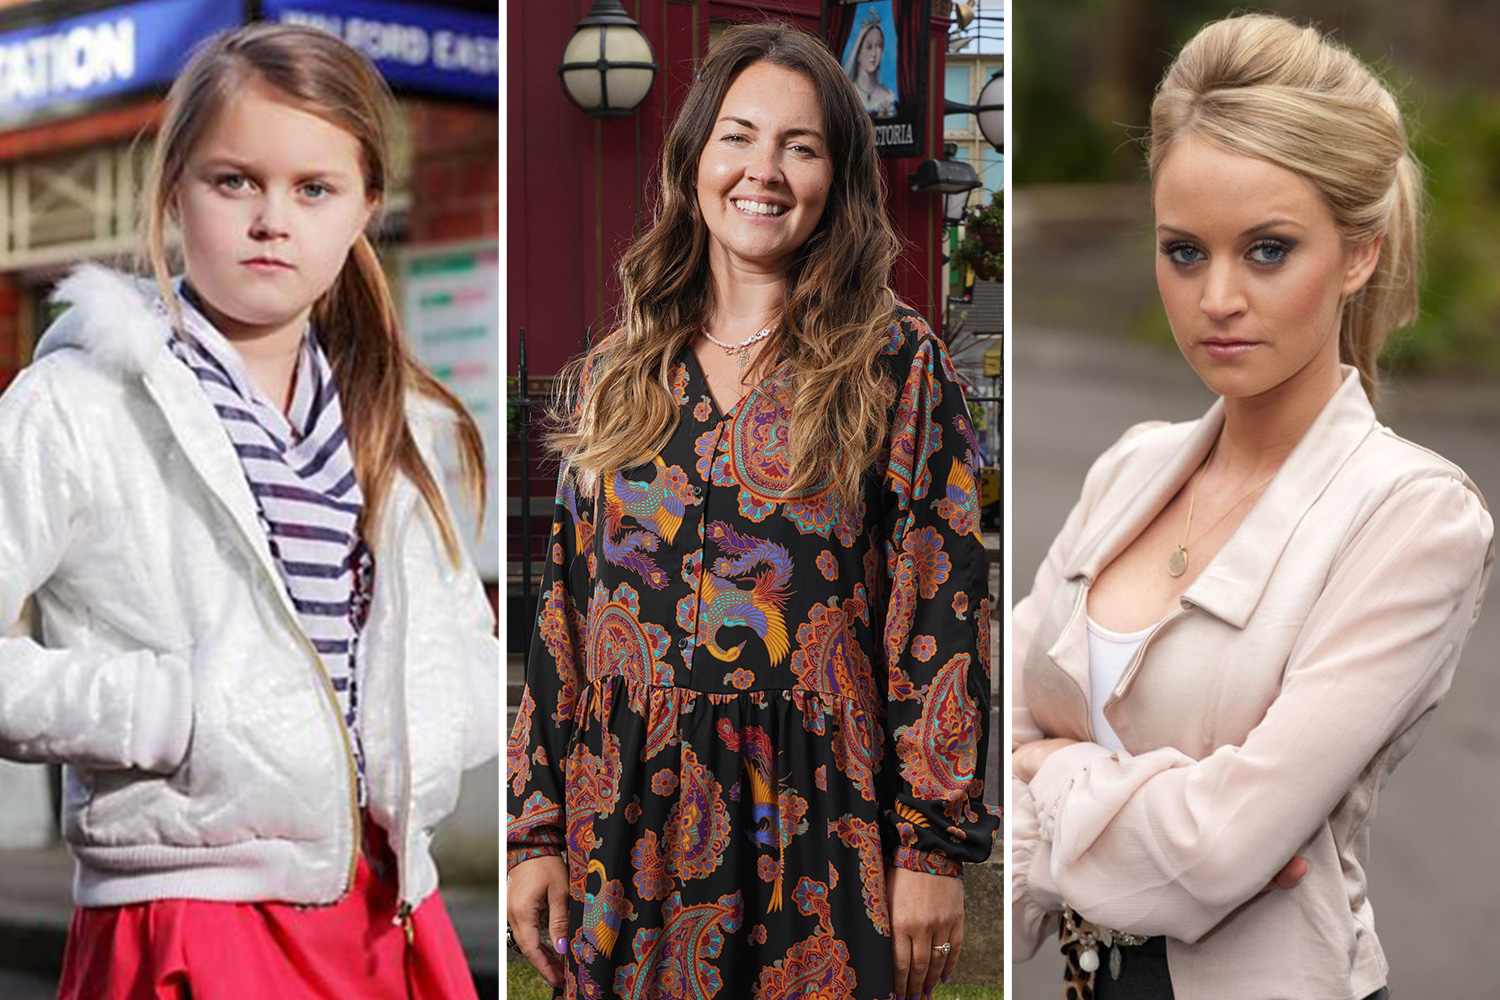 EastEnders' Lacey Turner has TWO famous actress sisters